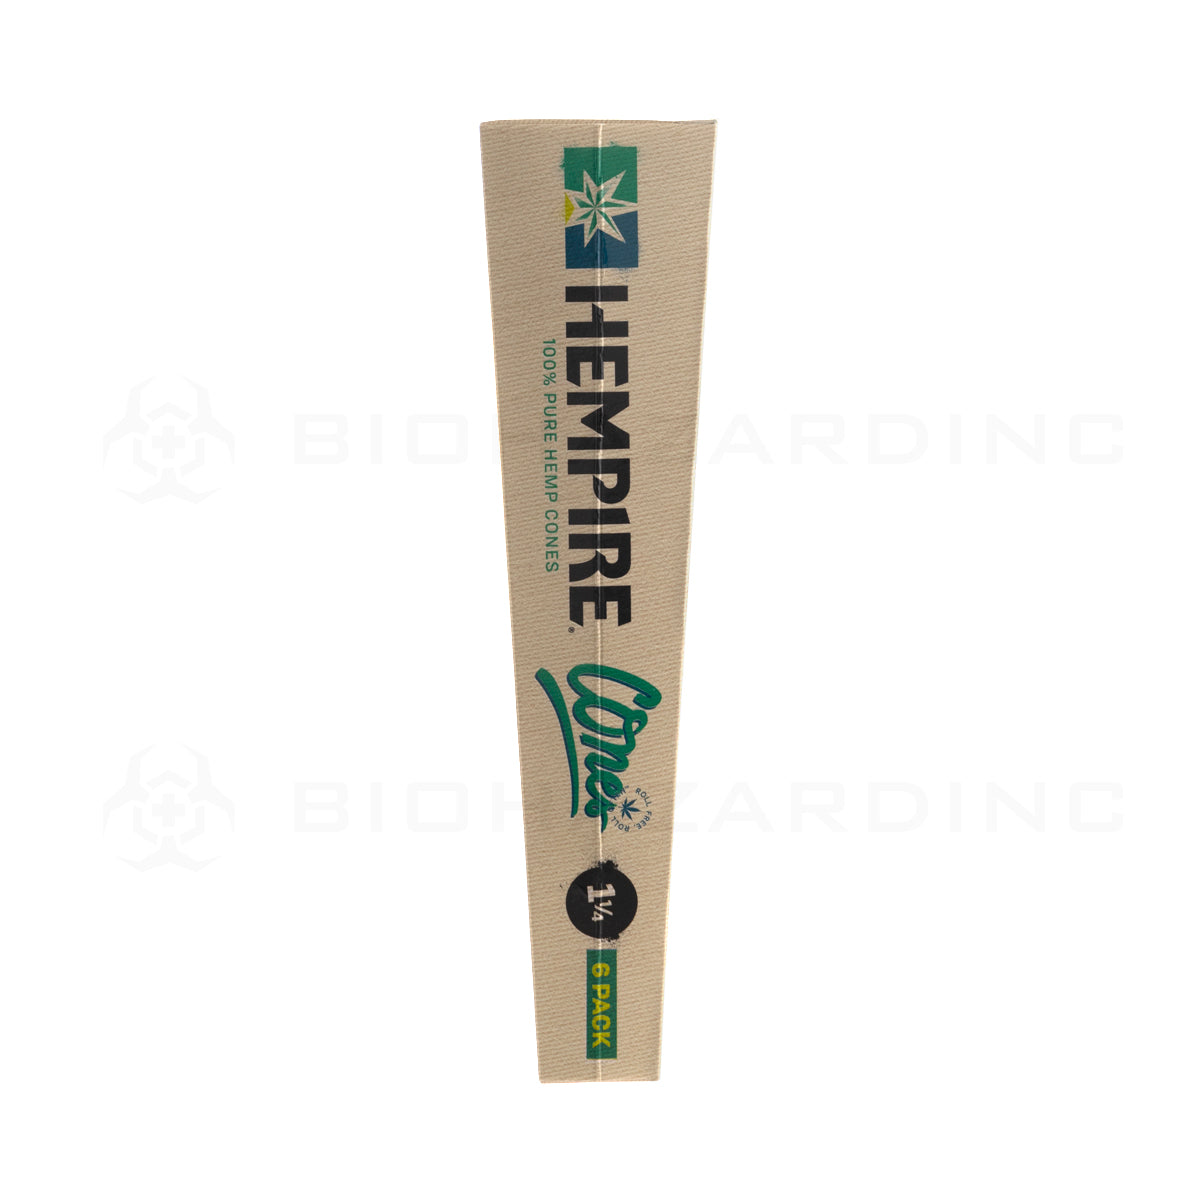 Hempire | Pre-Rolled Cones 1¼ Size | 84mm - Unbleached Paper - 24 Count Pre-Rolled Cones Biohazard Inc   